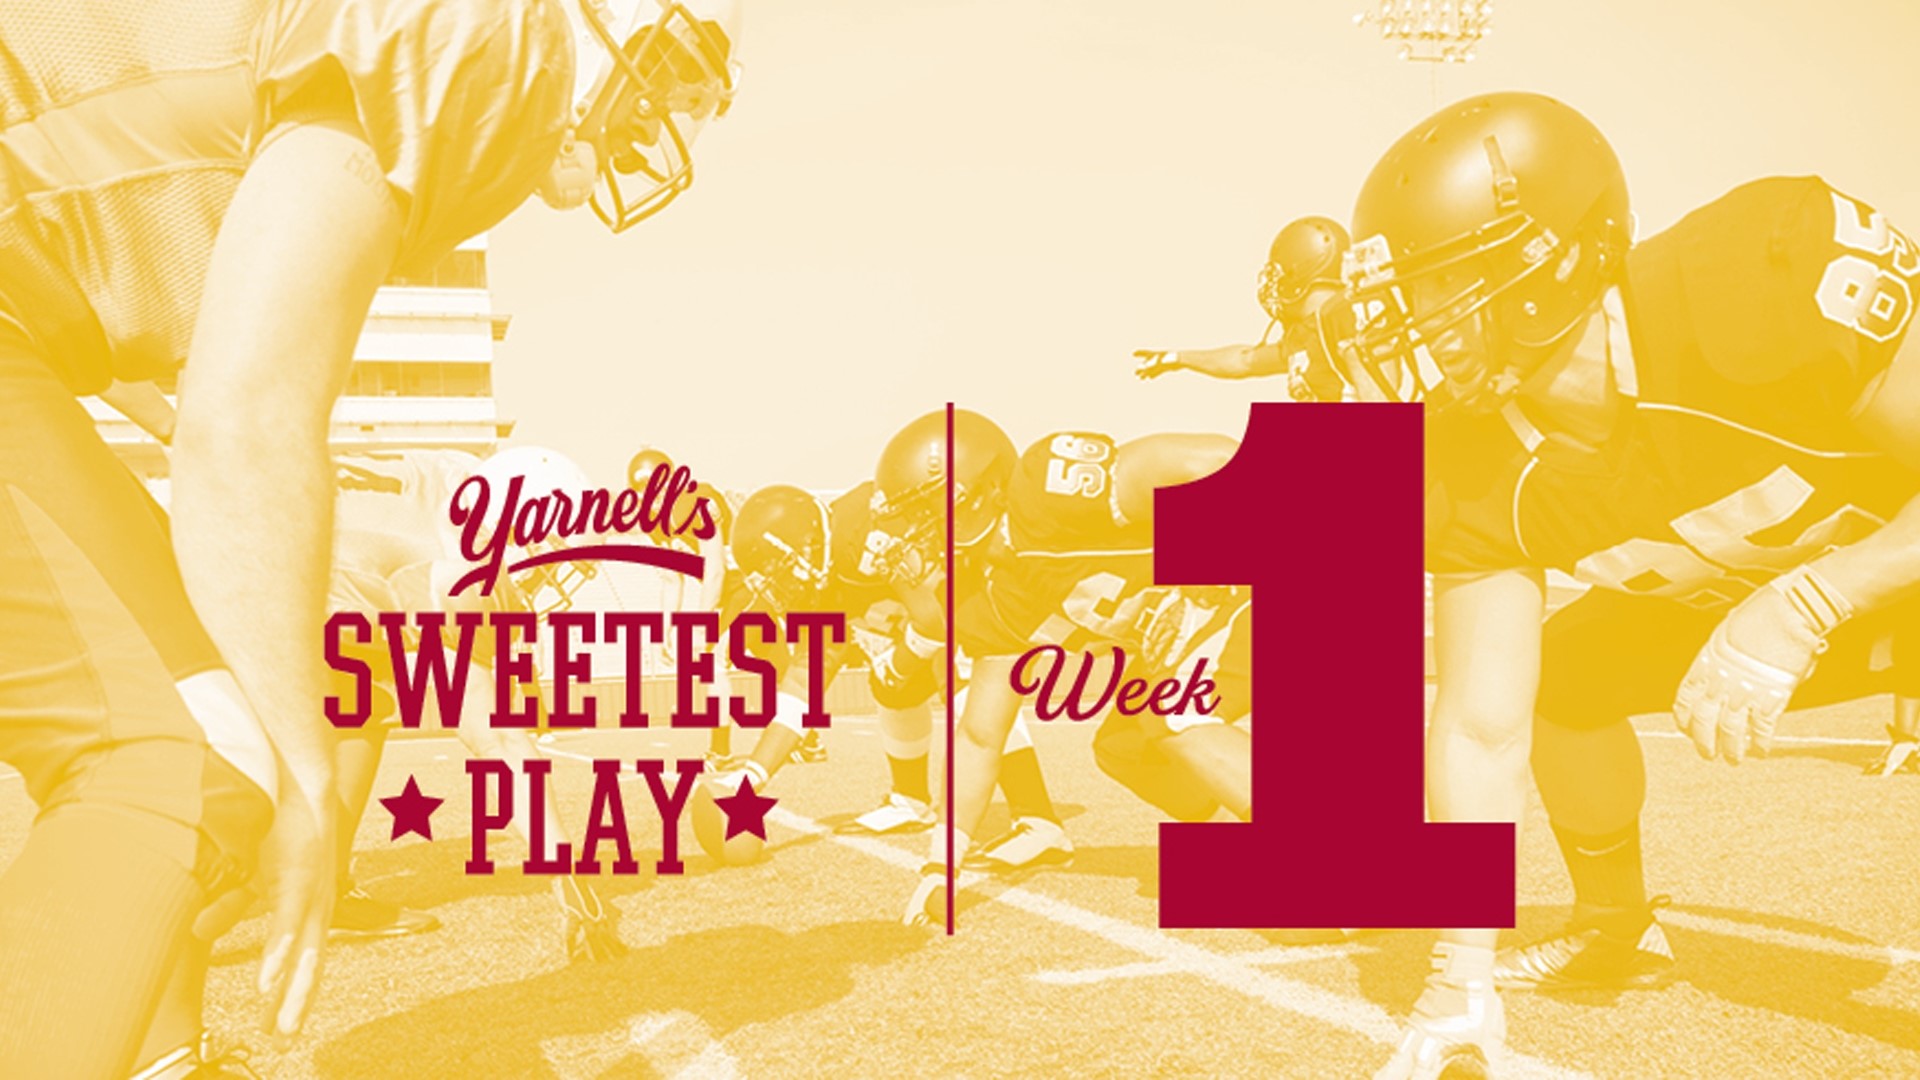 We've got plays from Pine Bluff, Conway, and Warren to choose from this week. Polls close each Tuesday at 5:00 p.m. and the winner gets a Yarnell's ice cream party!